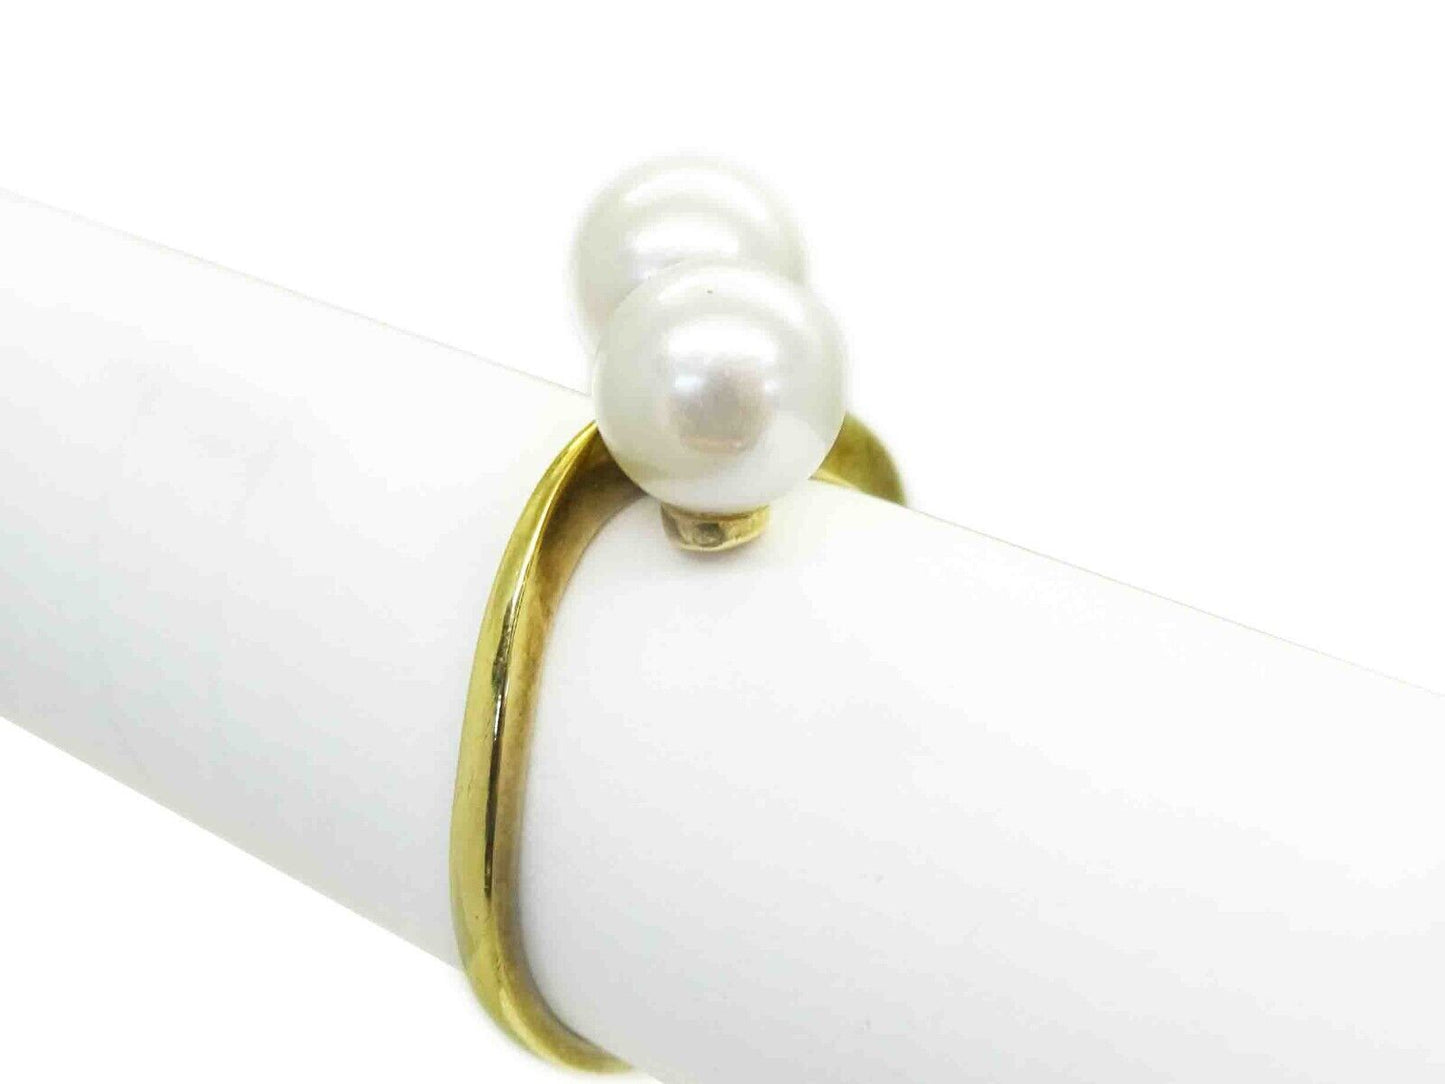 Mikimoto 7mm Wide Double Pearl Bypass Style Band Ring 14k Gold Size 7.5